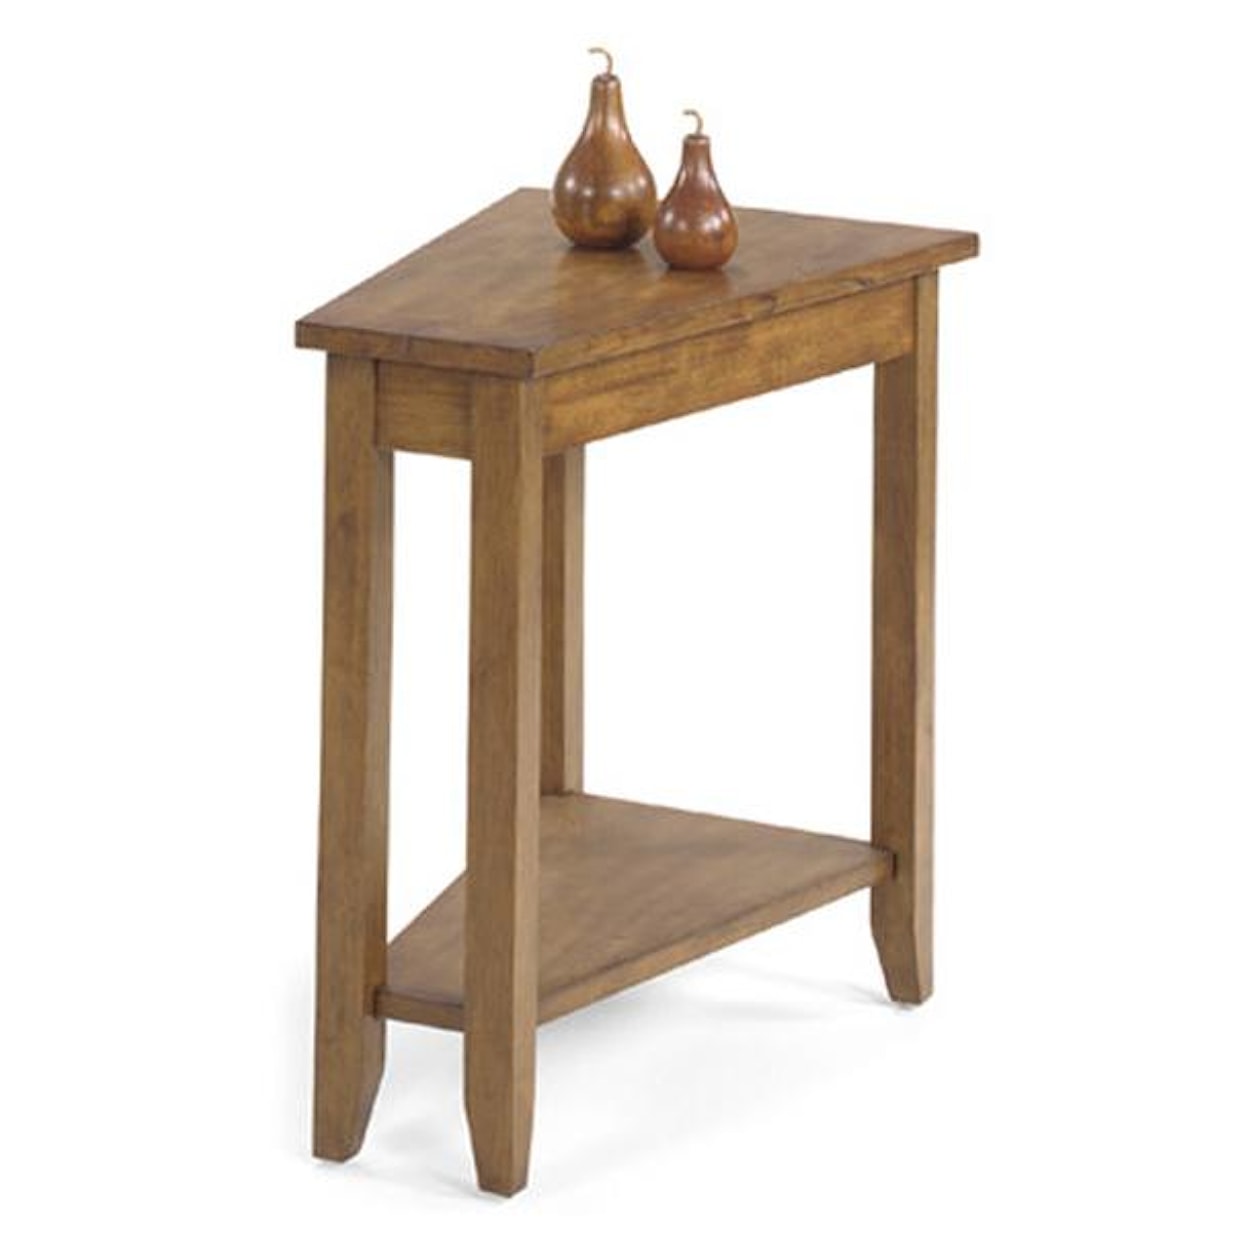 Null Furniture 1900 International Accents Wedge End Table